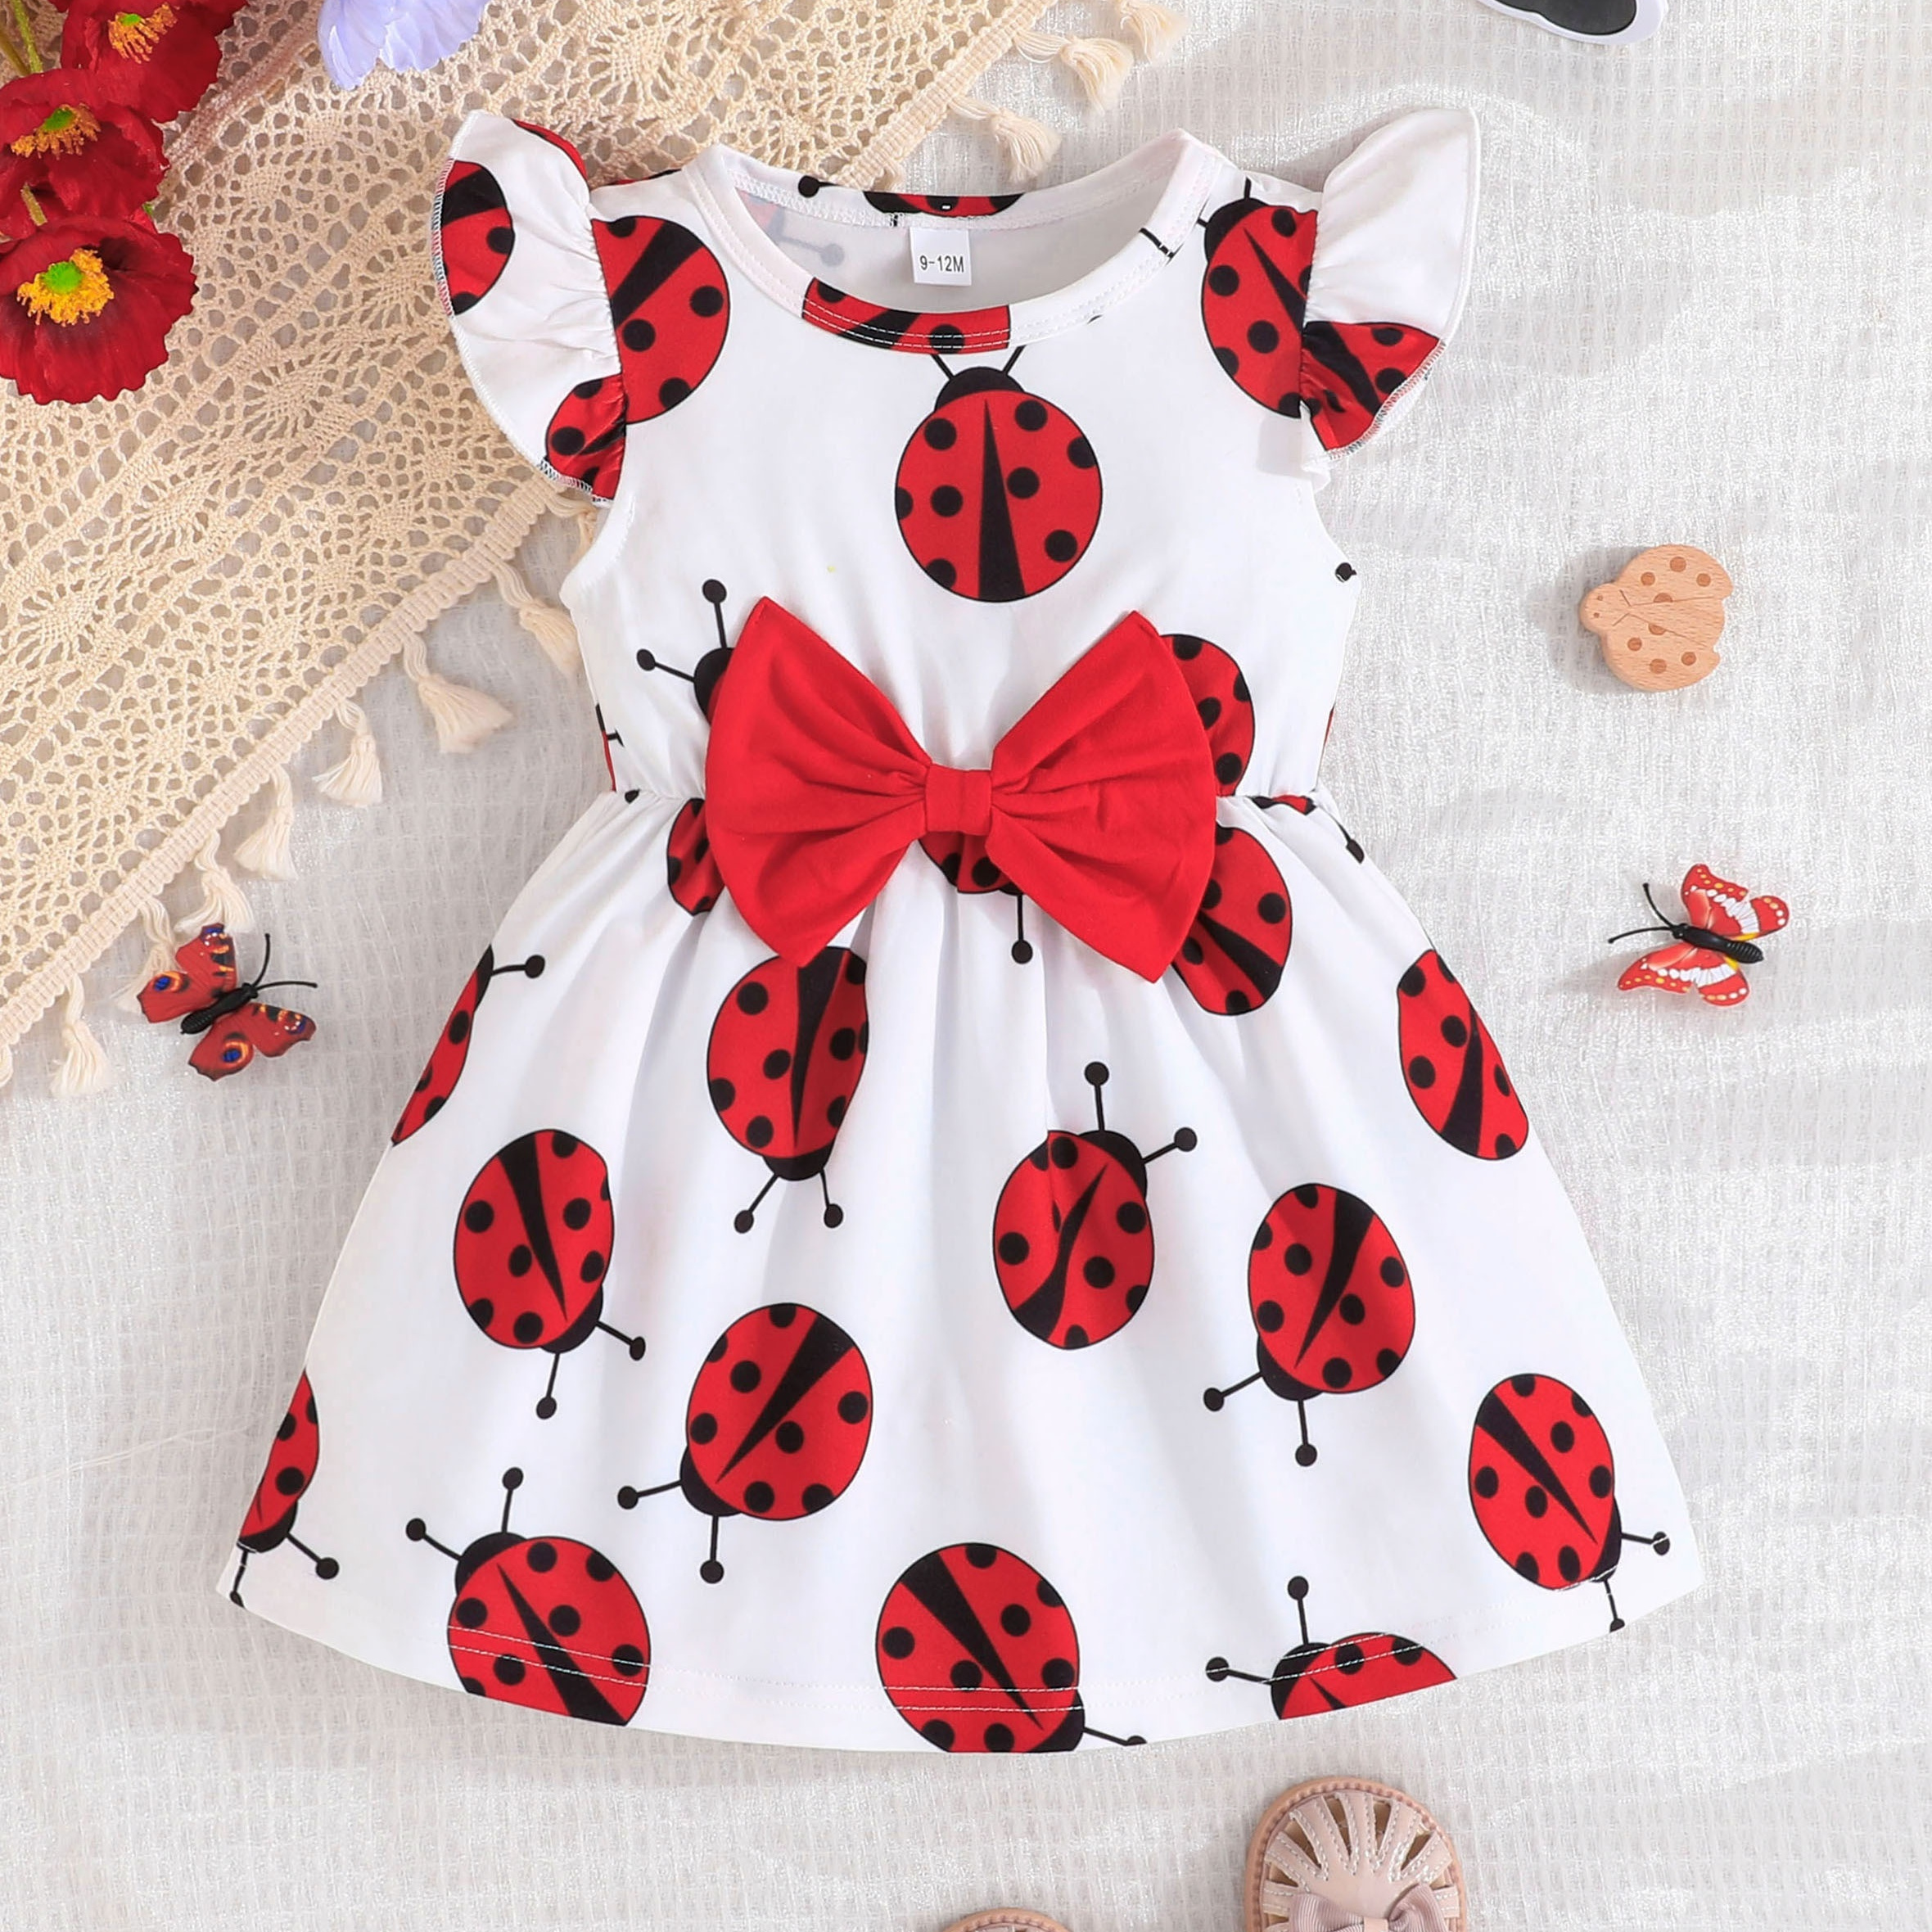 

Baby's Cute Bowknot Decor Ladybug Pattern Dress, Casual Cap Sleeve Dress, Infant & Toddler Girl's Clothing For Summer/spring, As Gift